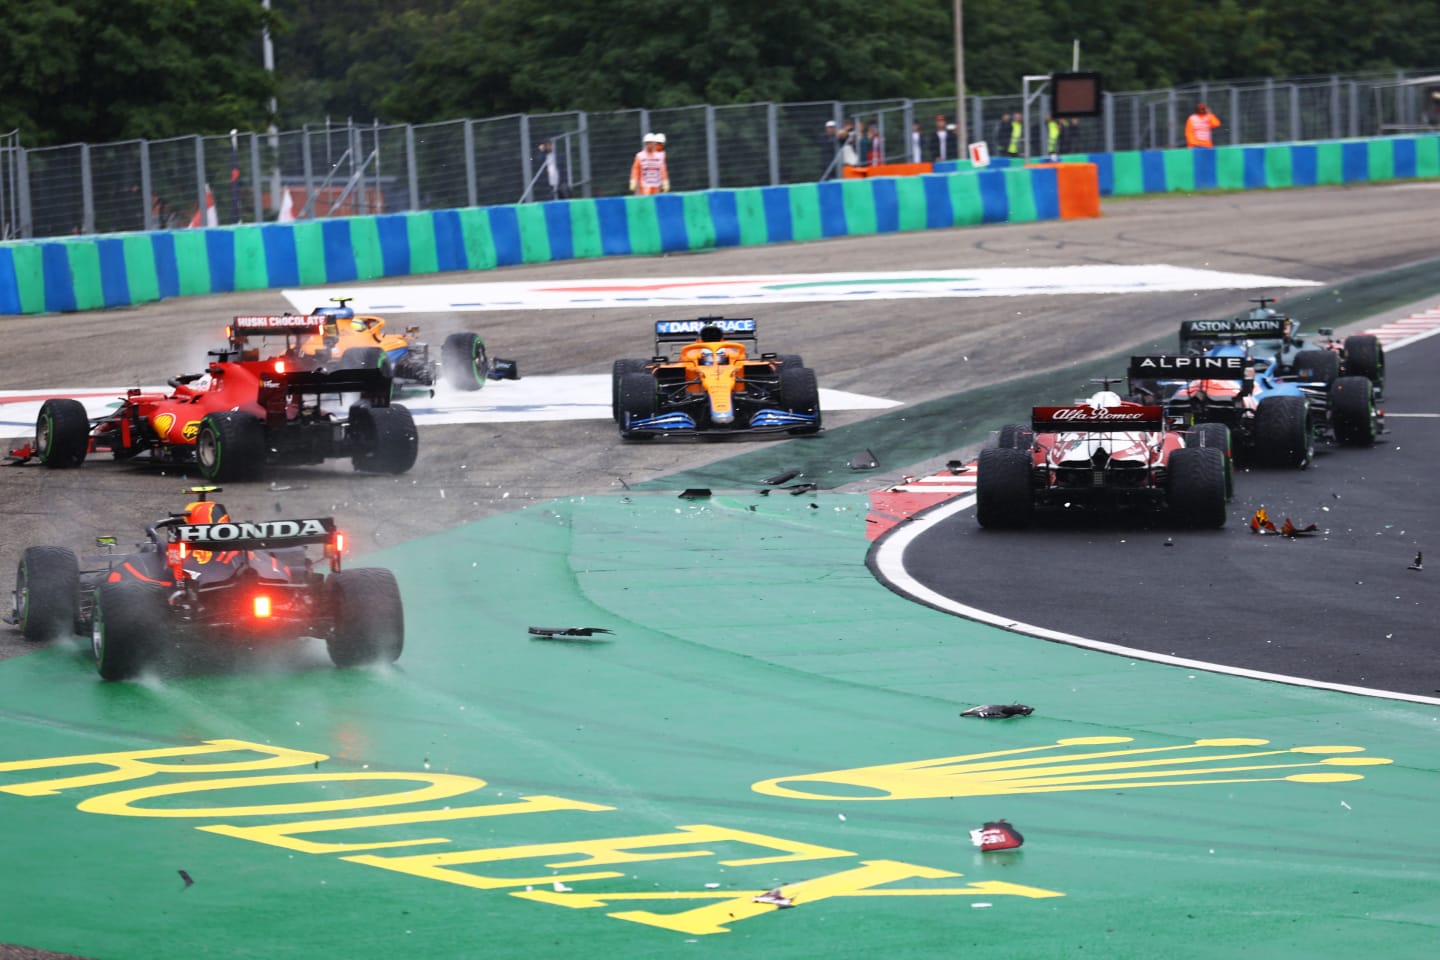 BUDAPEST, HUNGARY - AUGUST 01: A general view of the crash at the start during the F1 Grand Prix of